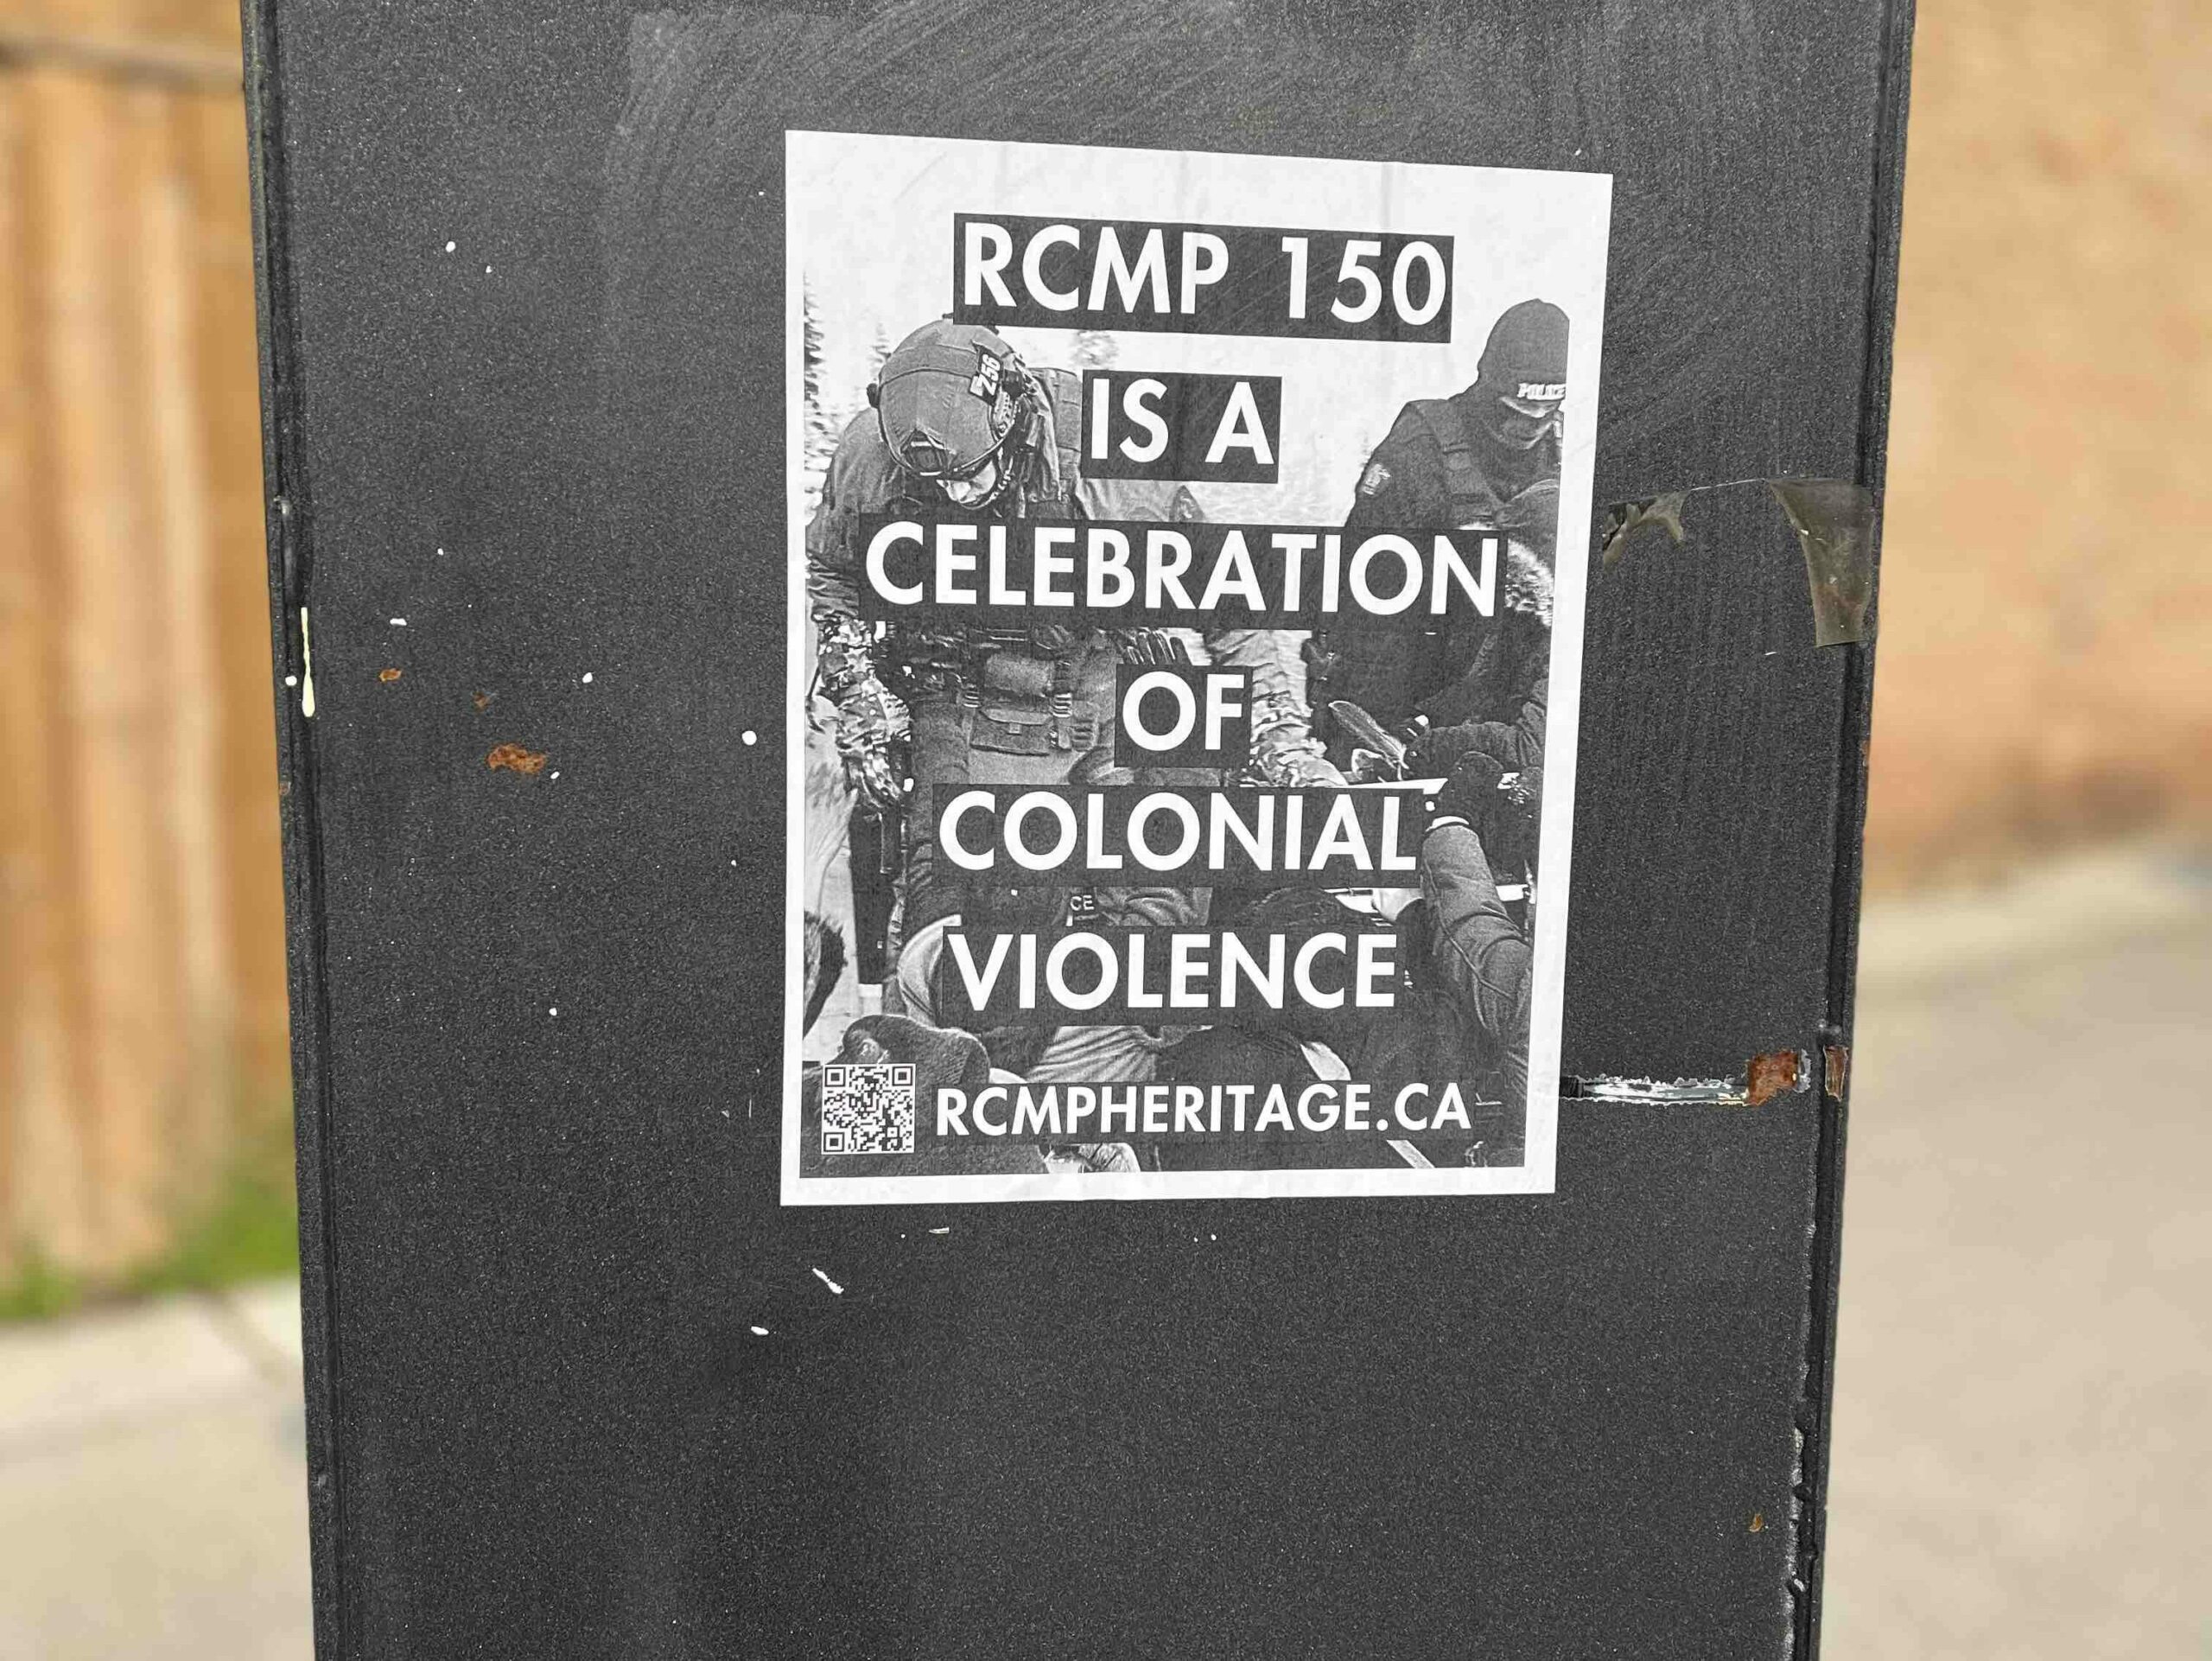 RCMP 150 celebration of colonial violence poster